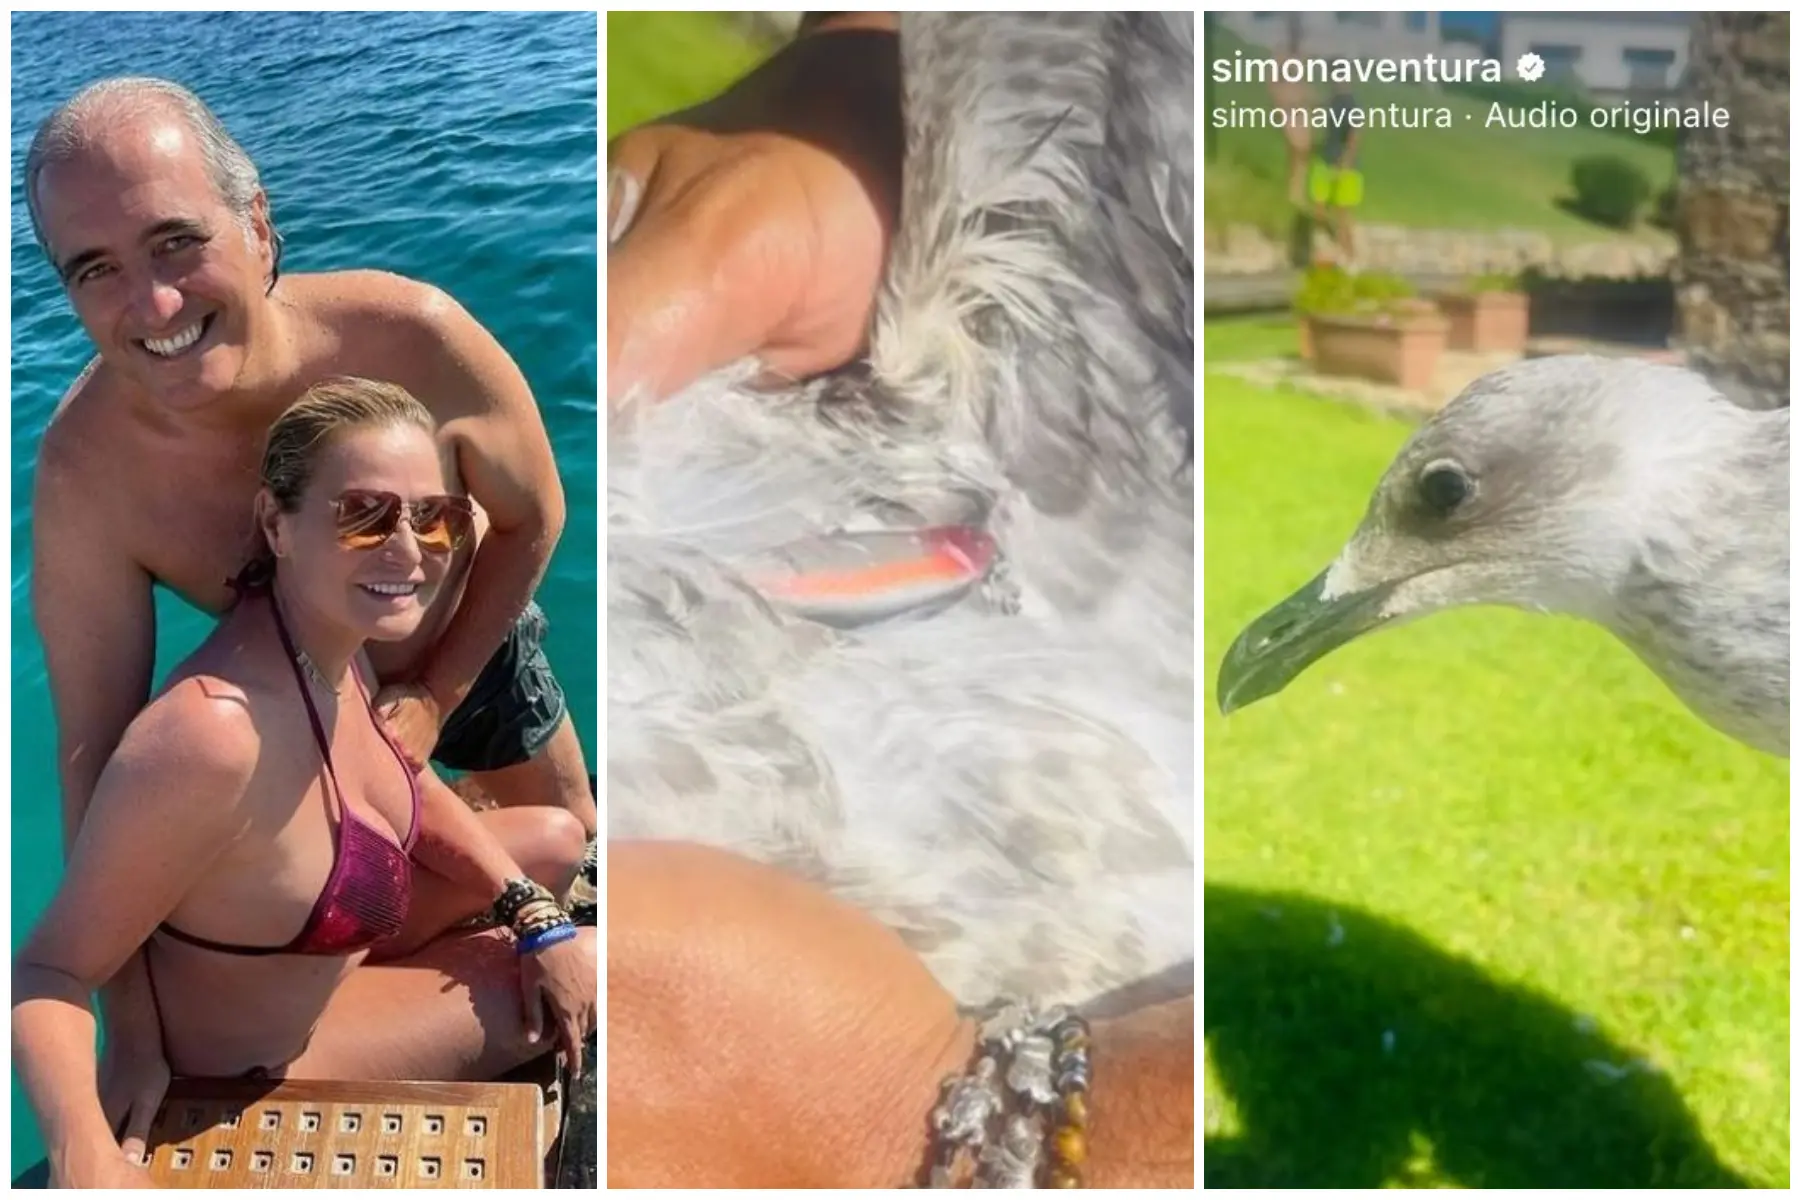 Simona Ventura with her partner Giovanni Terzi and the injured seagull (from Instagram)